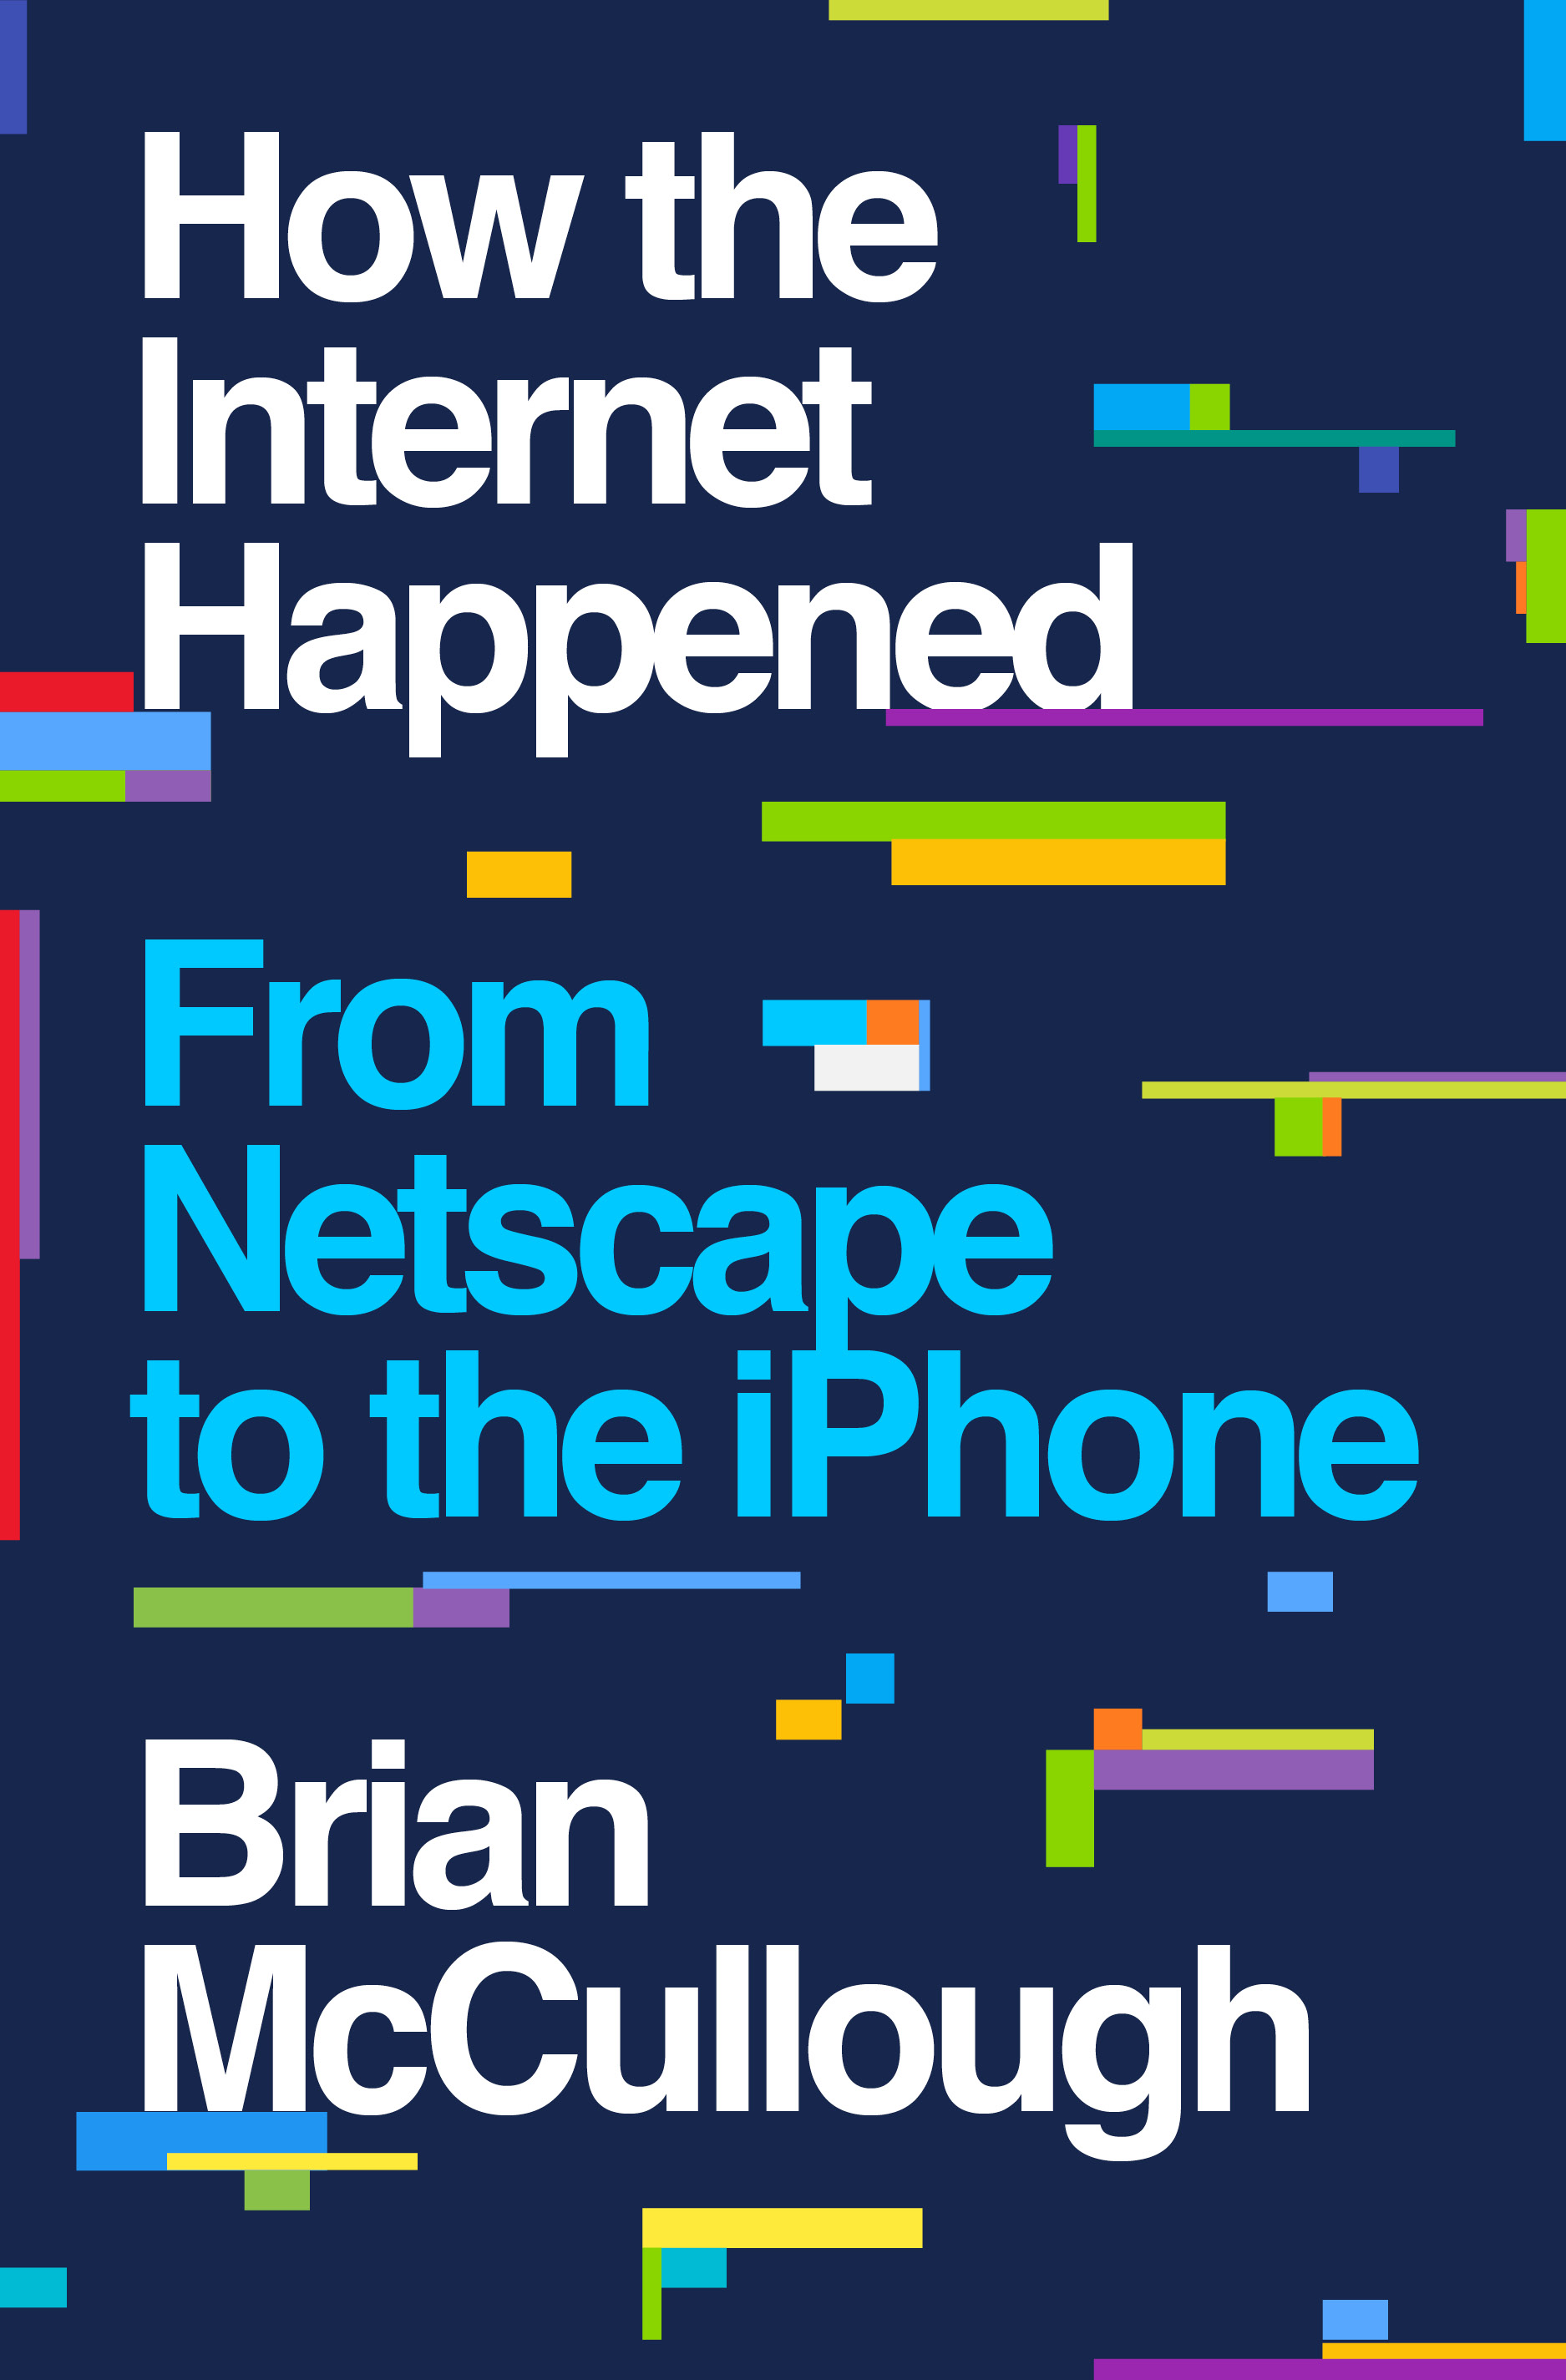 How the Internet happened from Netscape to the iPhone - image 1